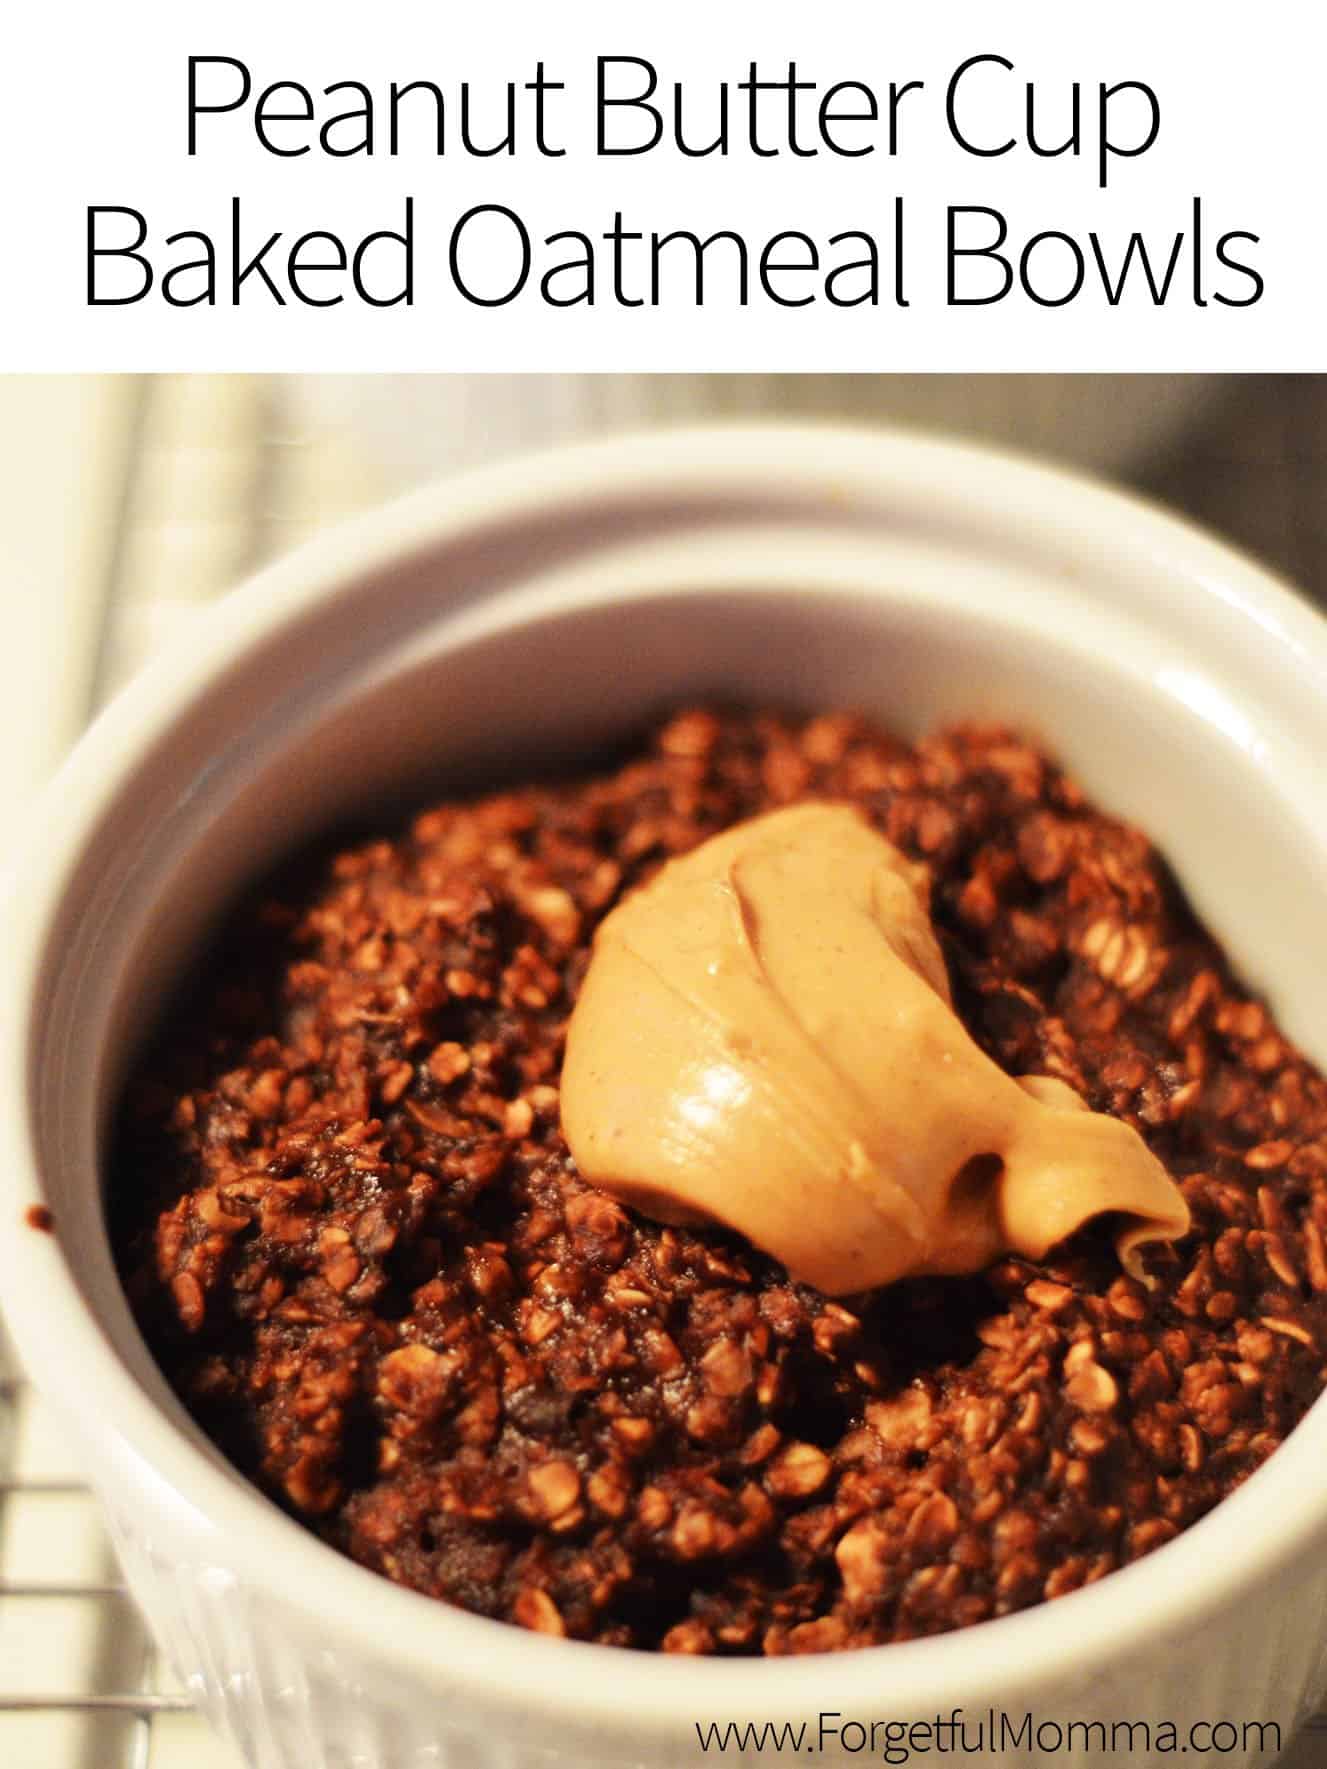 Peanut Butter Cup Baked Oatmeal Bowls